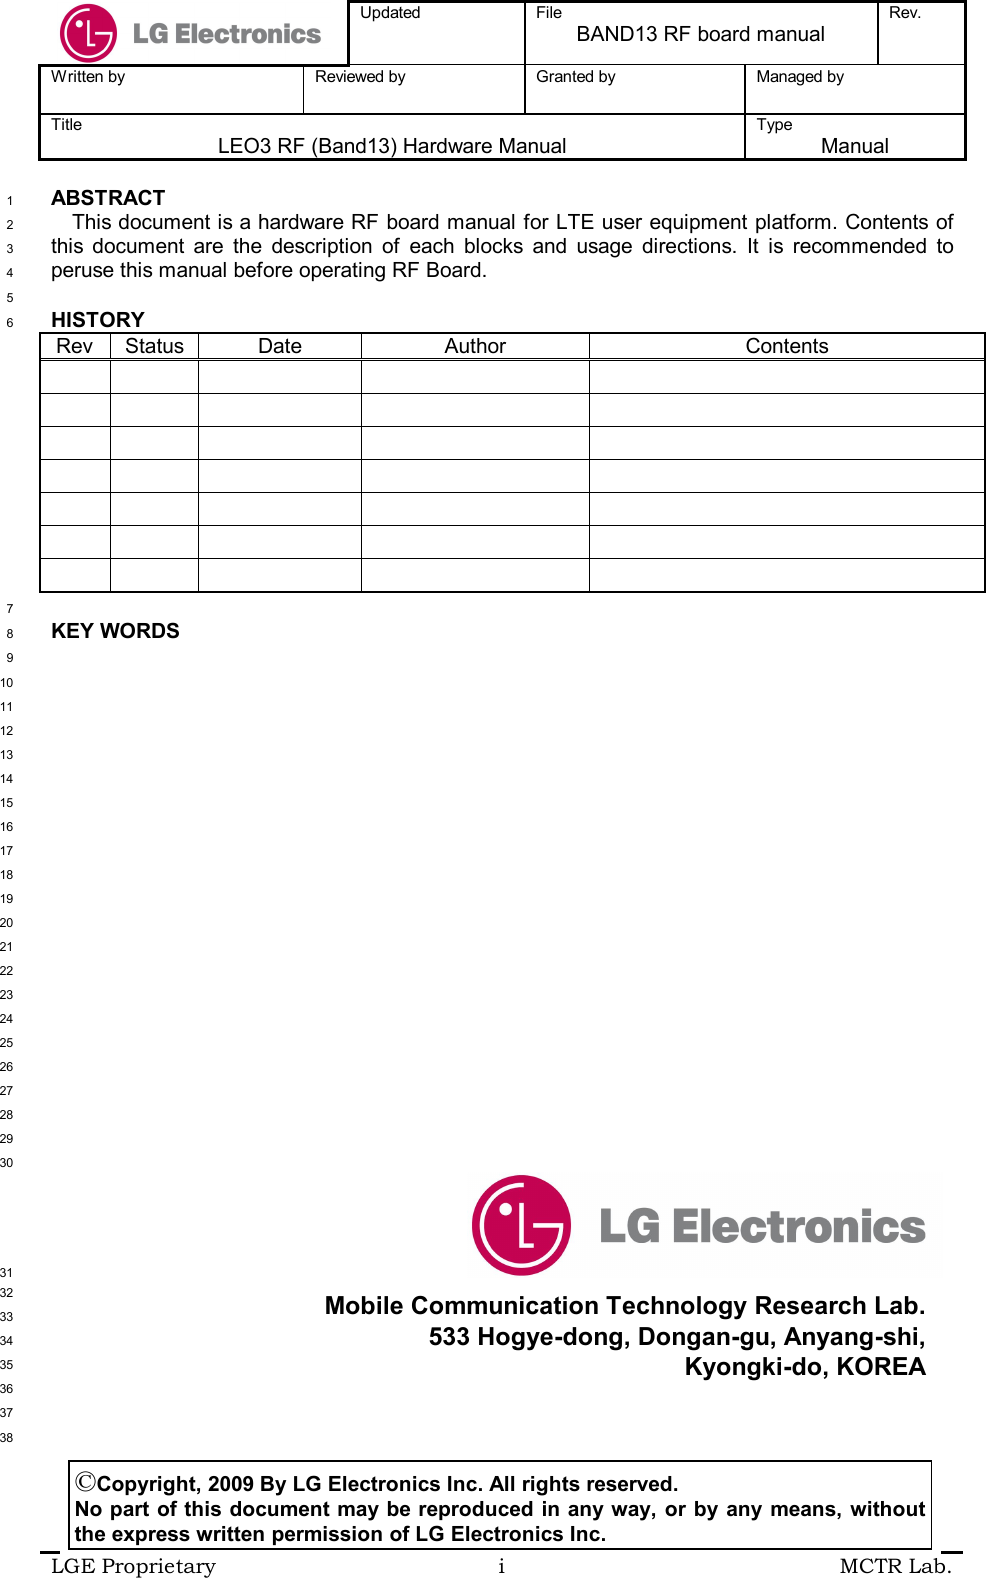  Updated  File BAND13 RF board manual Rev.  Written by  Reviewed by  Granted by  Managed by  Title LEO3 RF (Band13) Hardware Manual Type  Manual  LGE Proprietary  i  MCTR Lab.  ABSTRACT 1 This document is a hardware RF board manual for LTE user equipment platform. Contents of 2 this  document  are  the  description  of  each  blocks  and  usage  directions.  It  is  recommended  to 3 peruse this manual before operating RF Board. 4  5 HISTORY 6 Rev Status Date  Author  Contents                                                                 7 KEY WORDS 8  9  10  11  12  13  14  15  16  17  18  19  20  21  22  23  24  25  26  27  28  29  30                                                                   31  32  33  34  35  36  37  38 ©Copyright, 2009 By LG Electronics Inc. All rights reserved. No part of this document may be reproduced in any way, or by any means, without the express written permission of LG Electronics Inc. Mobile Communication Technology Research Lab. 533 Hogye-dong, Dongan-gu, Anyang-shi, Kyongki-do, KOREA 